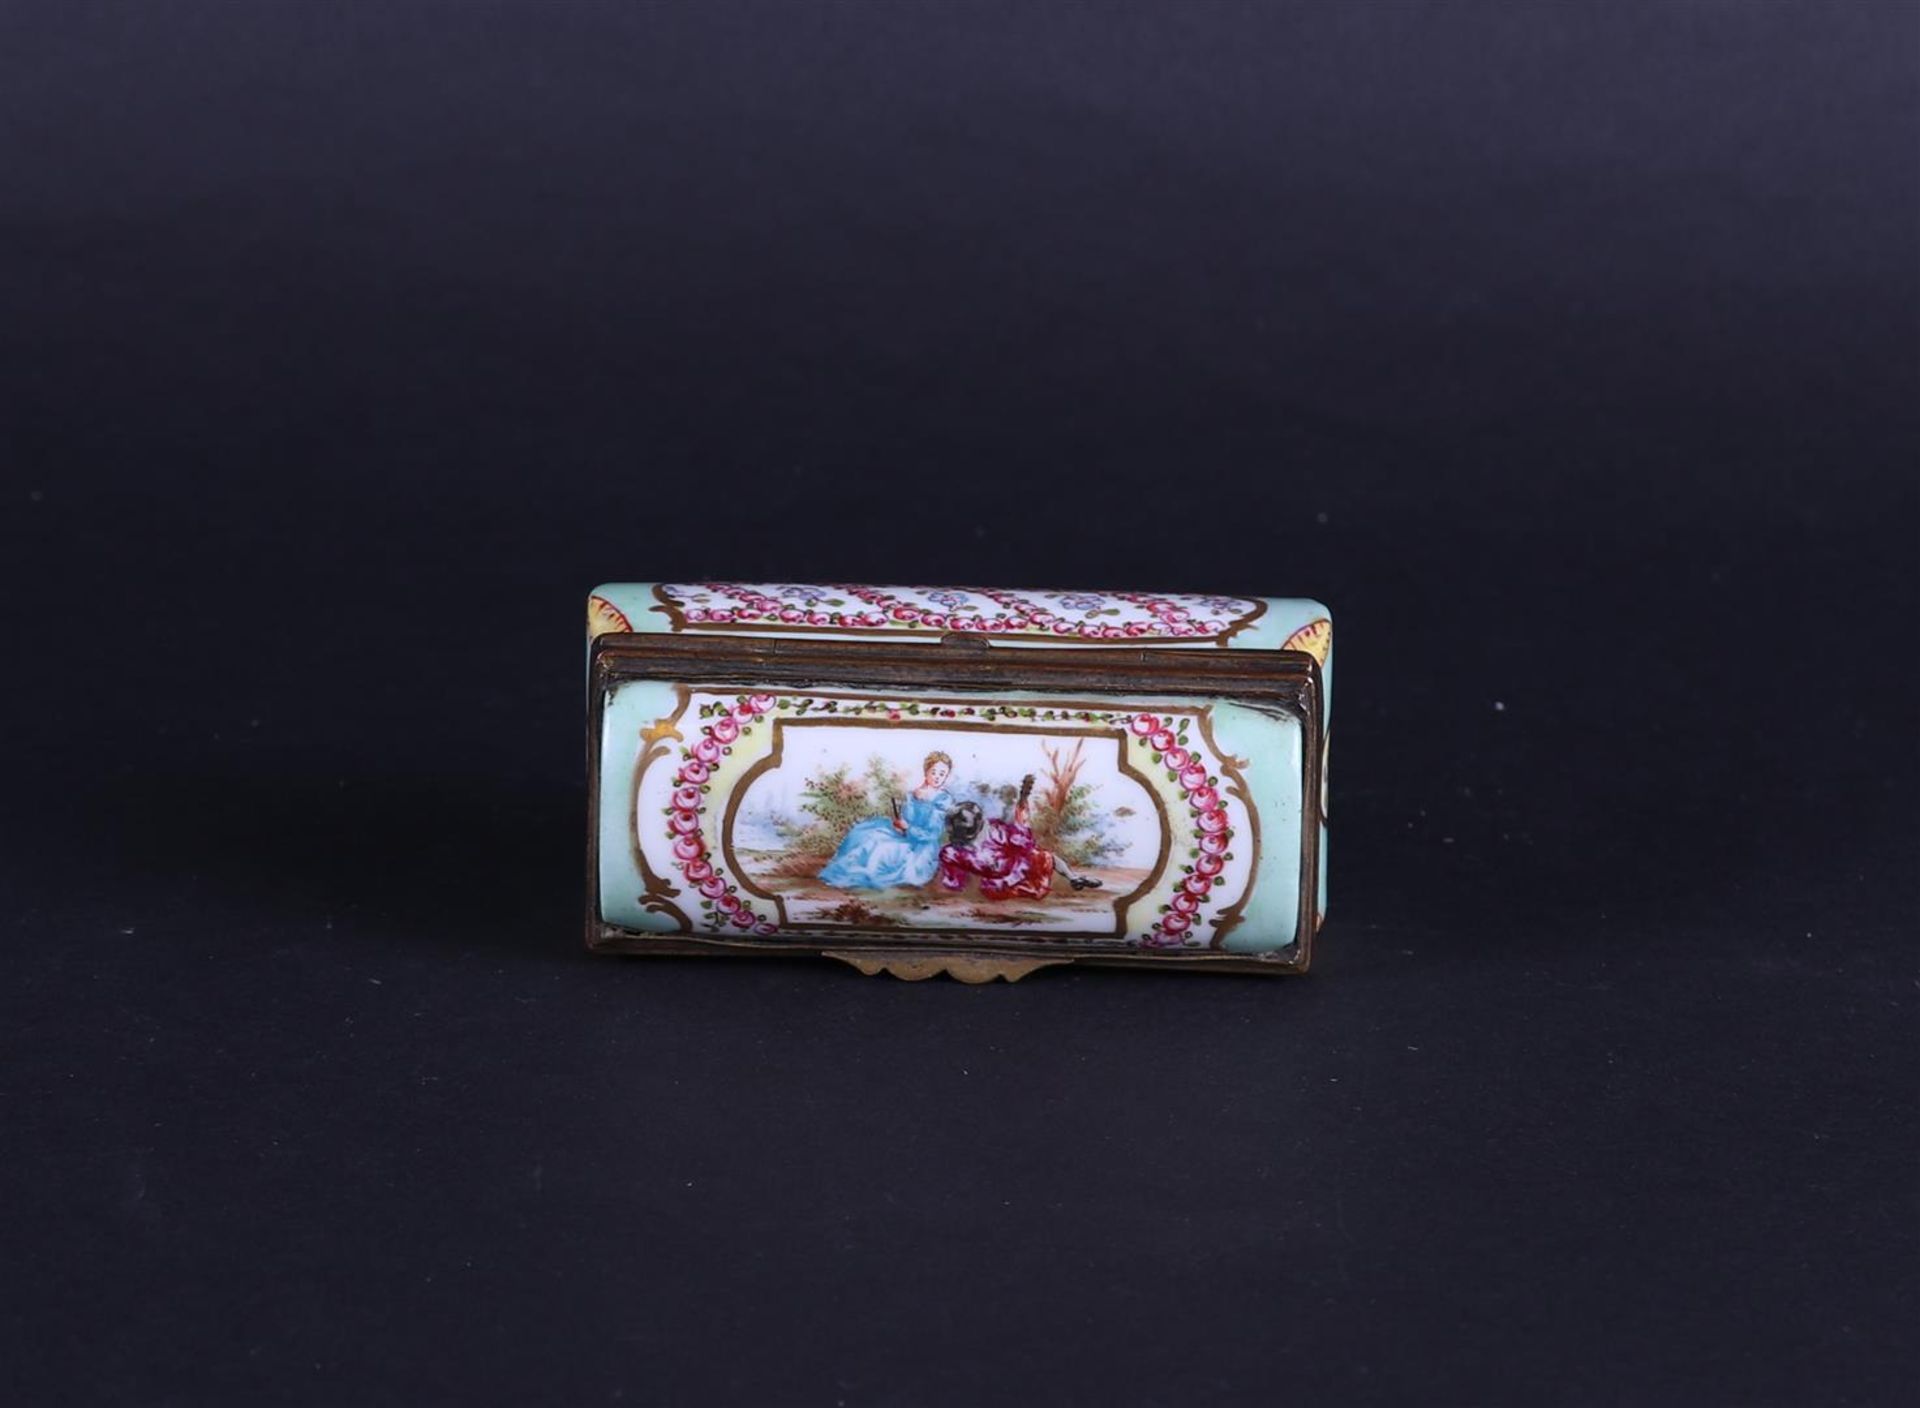 A porcelain lidded box with floral decor, marked: "Meissen" on the bottom. Germany, circa 1900. - Bild 3 aus 4